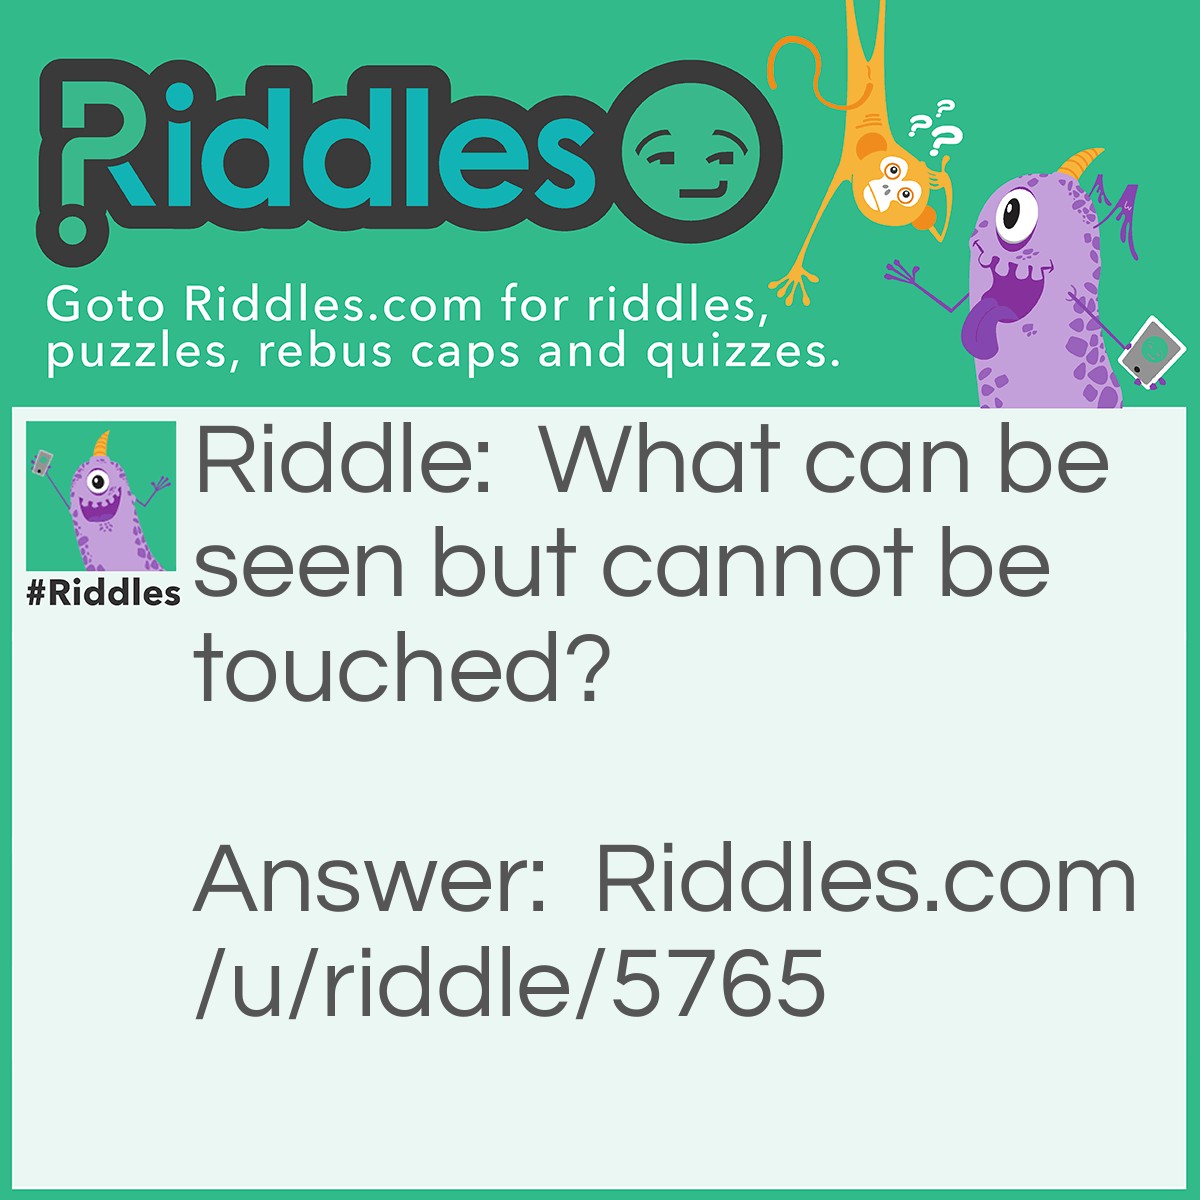 Riddle: What can be seen but cannot be touched? Answer: Software.